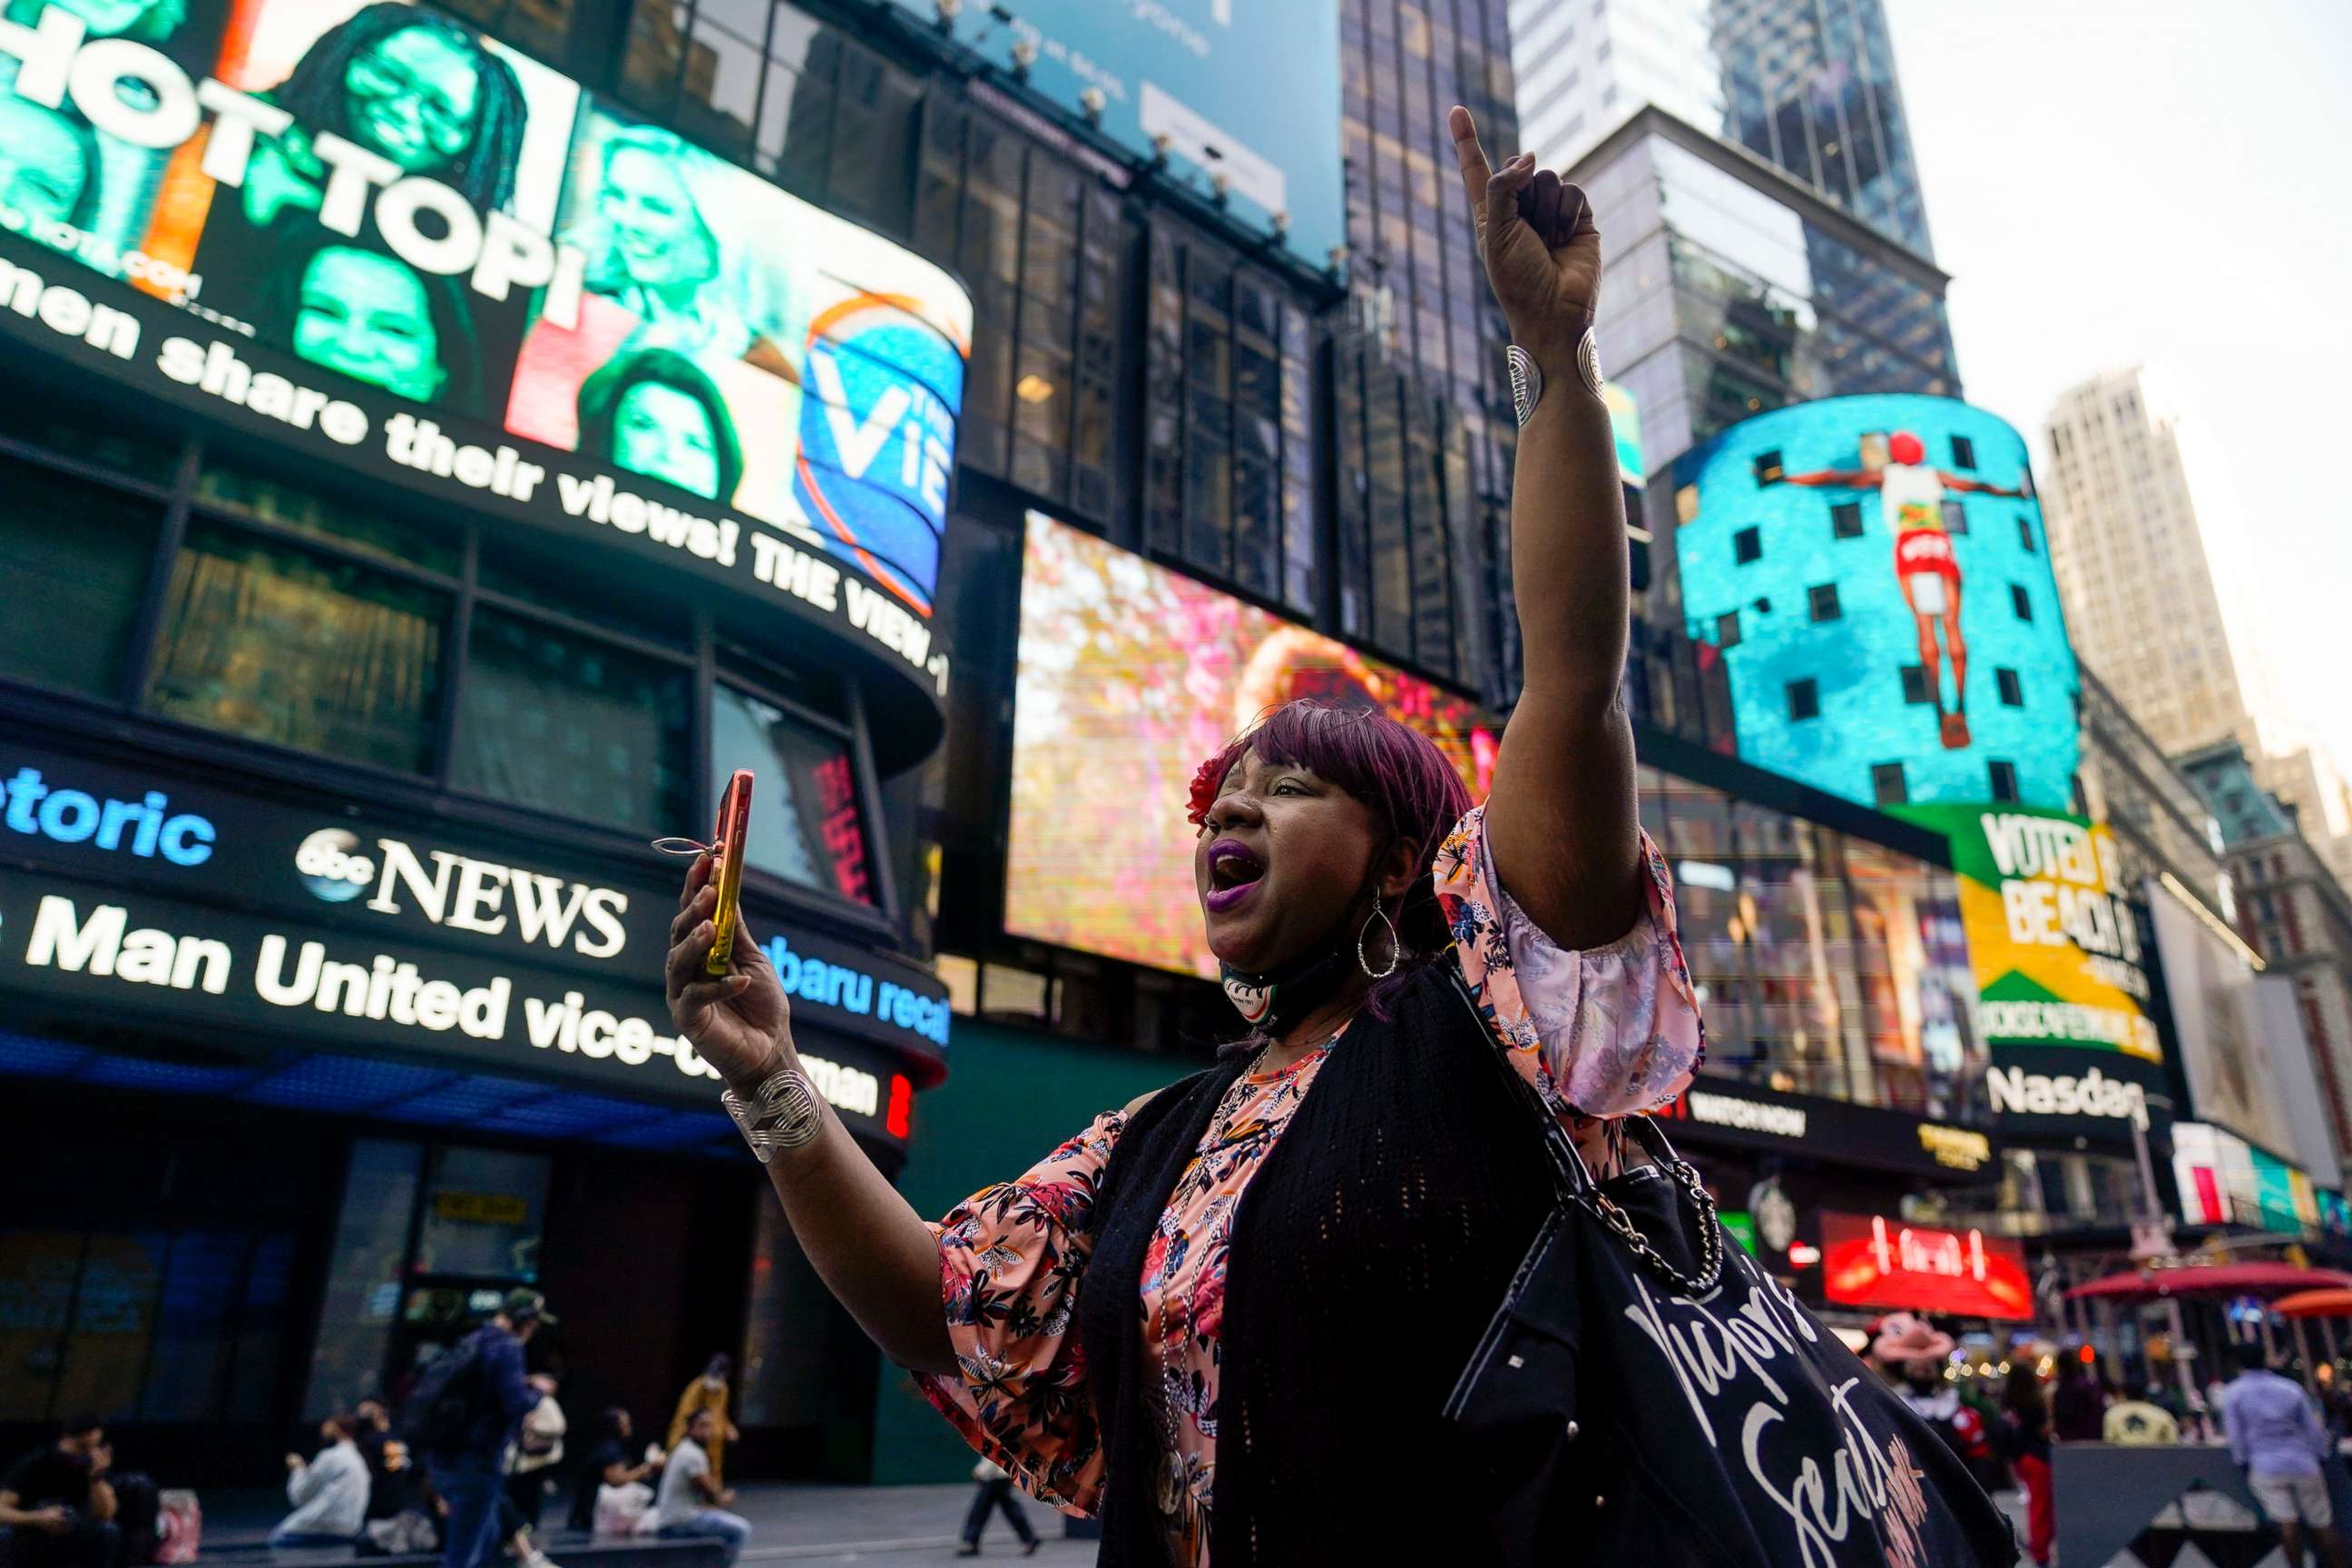 PHOTO: AniYa A motions as she walks through Times Square in New York, while talking on her cell phone after a Minnesota jury found Former Minneapolis police officer Derek Chauvin guilty of murder and manslaughter, April 20, 2021. 